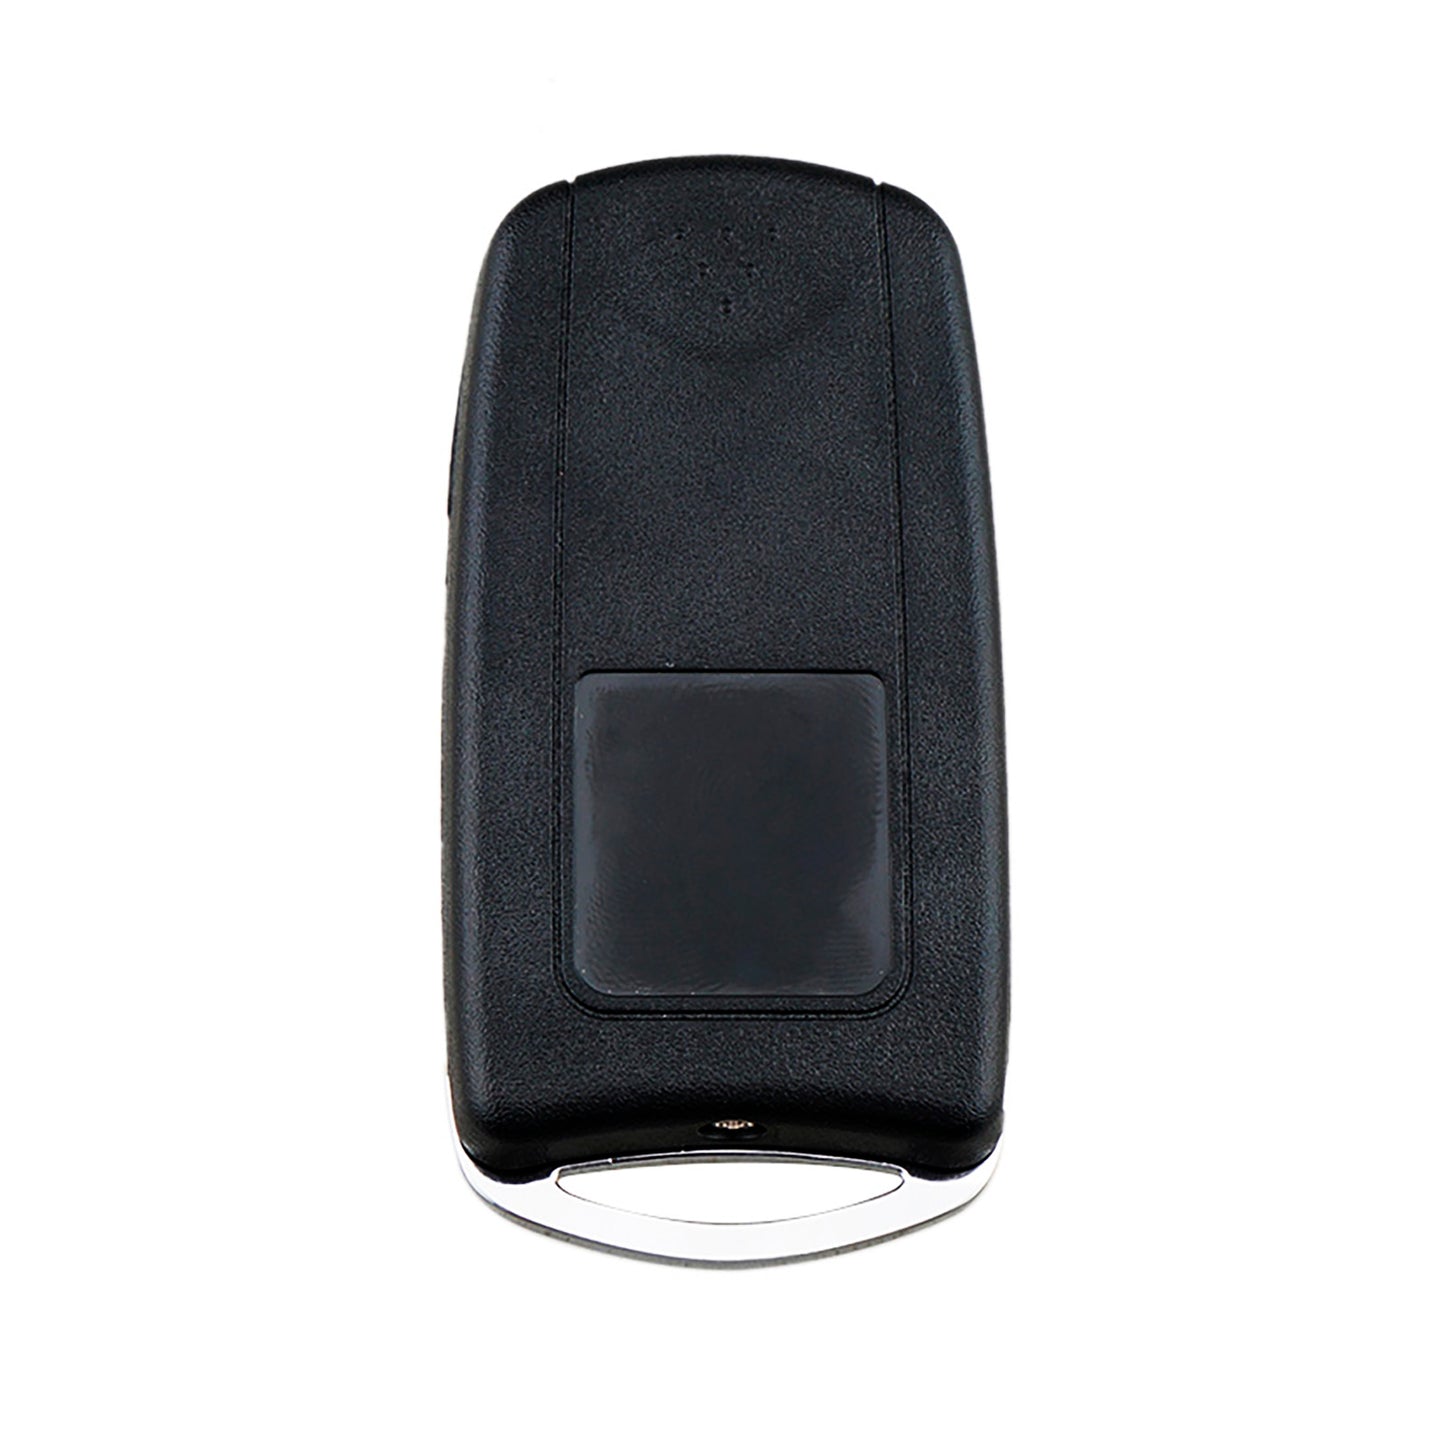 4 Buttons 313.8MHz Keyless Entry Fob Remote Car Key For 2008-2014 Acura TL TSX ZDX Honda Accord (Coupe Only) FCC ID: MLBHLIK-1T SKU : J258